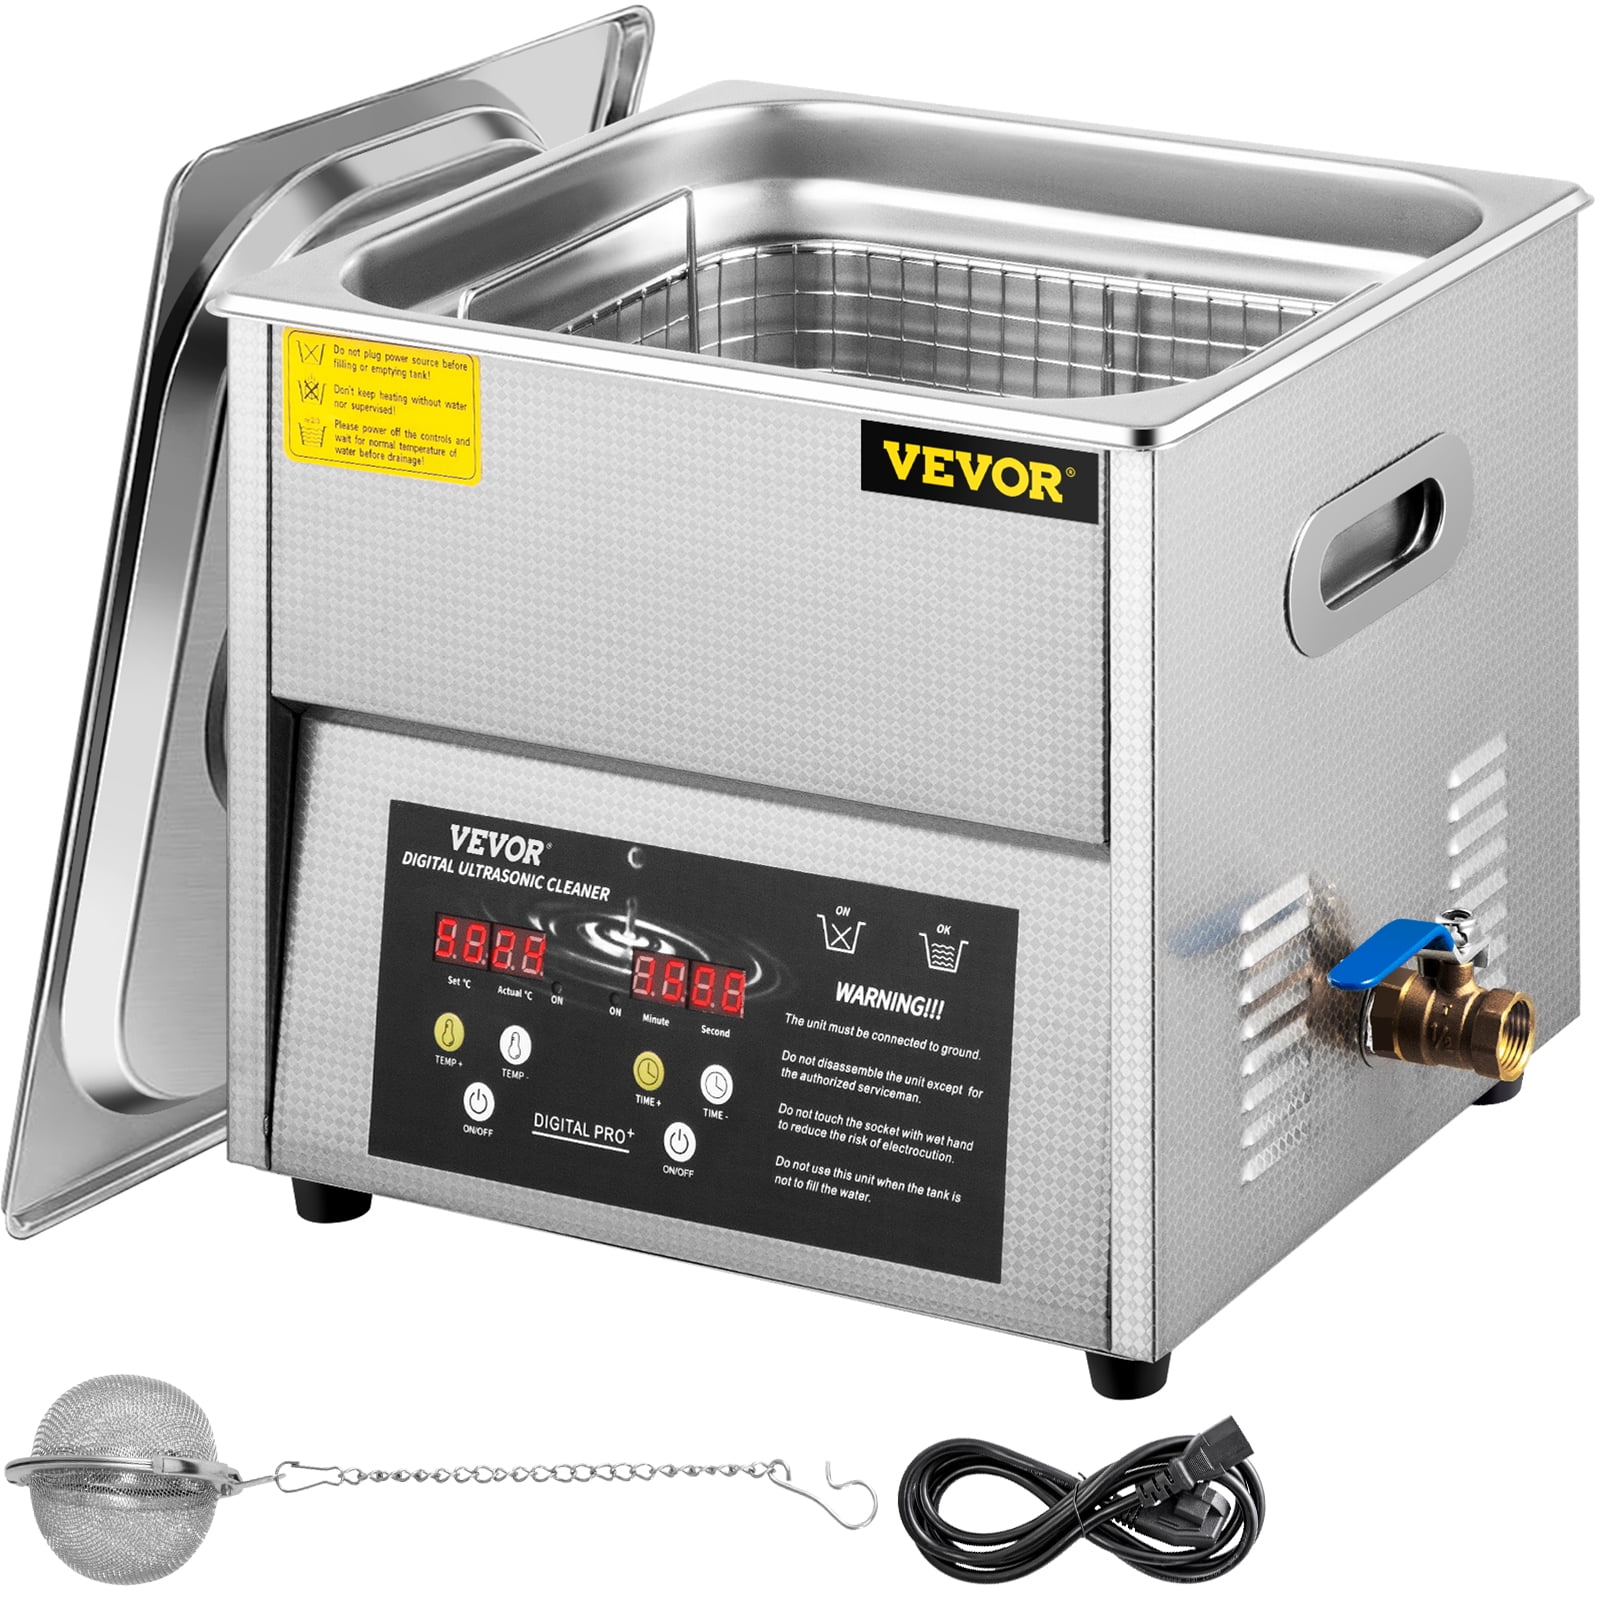 VEVOR Professional Ultrasonic Cleaner 10L/2.5 Gal, Easy to Use with Digital  Timer & Heater, Stainless Steel Industrial Machine for Jewelry Dentures  Small Parts, 110V, FCC/CE/RoHS Certified